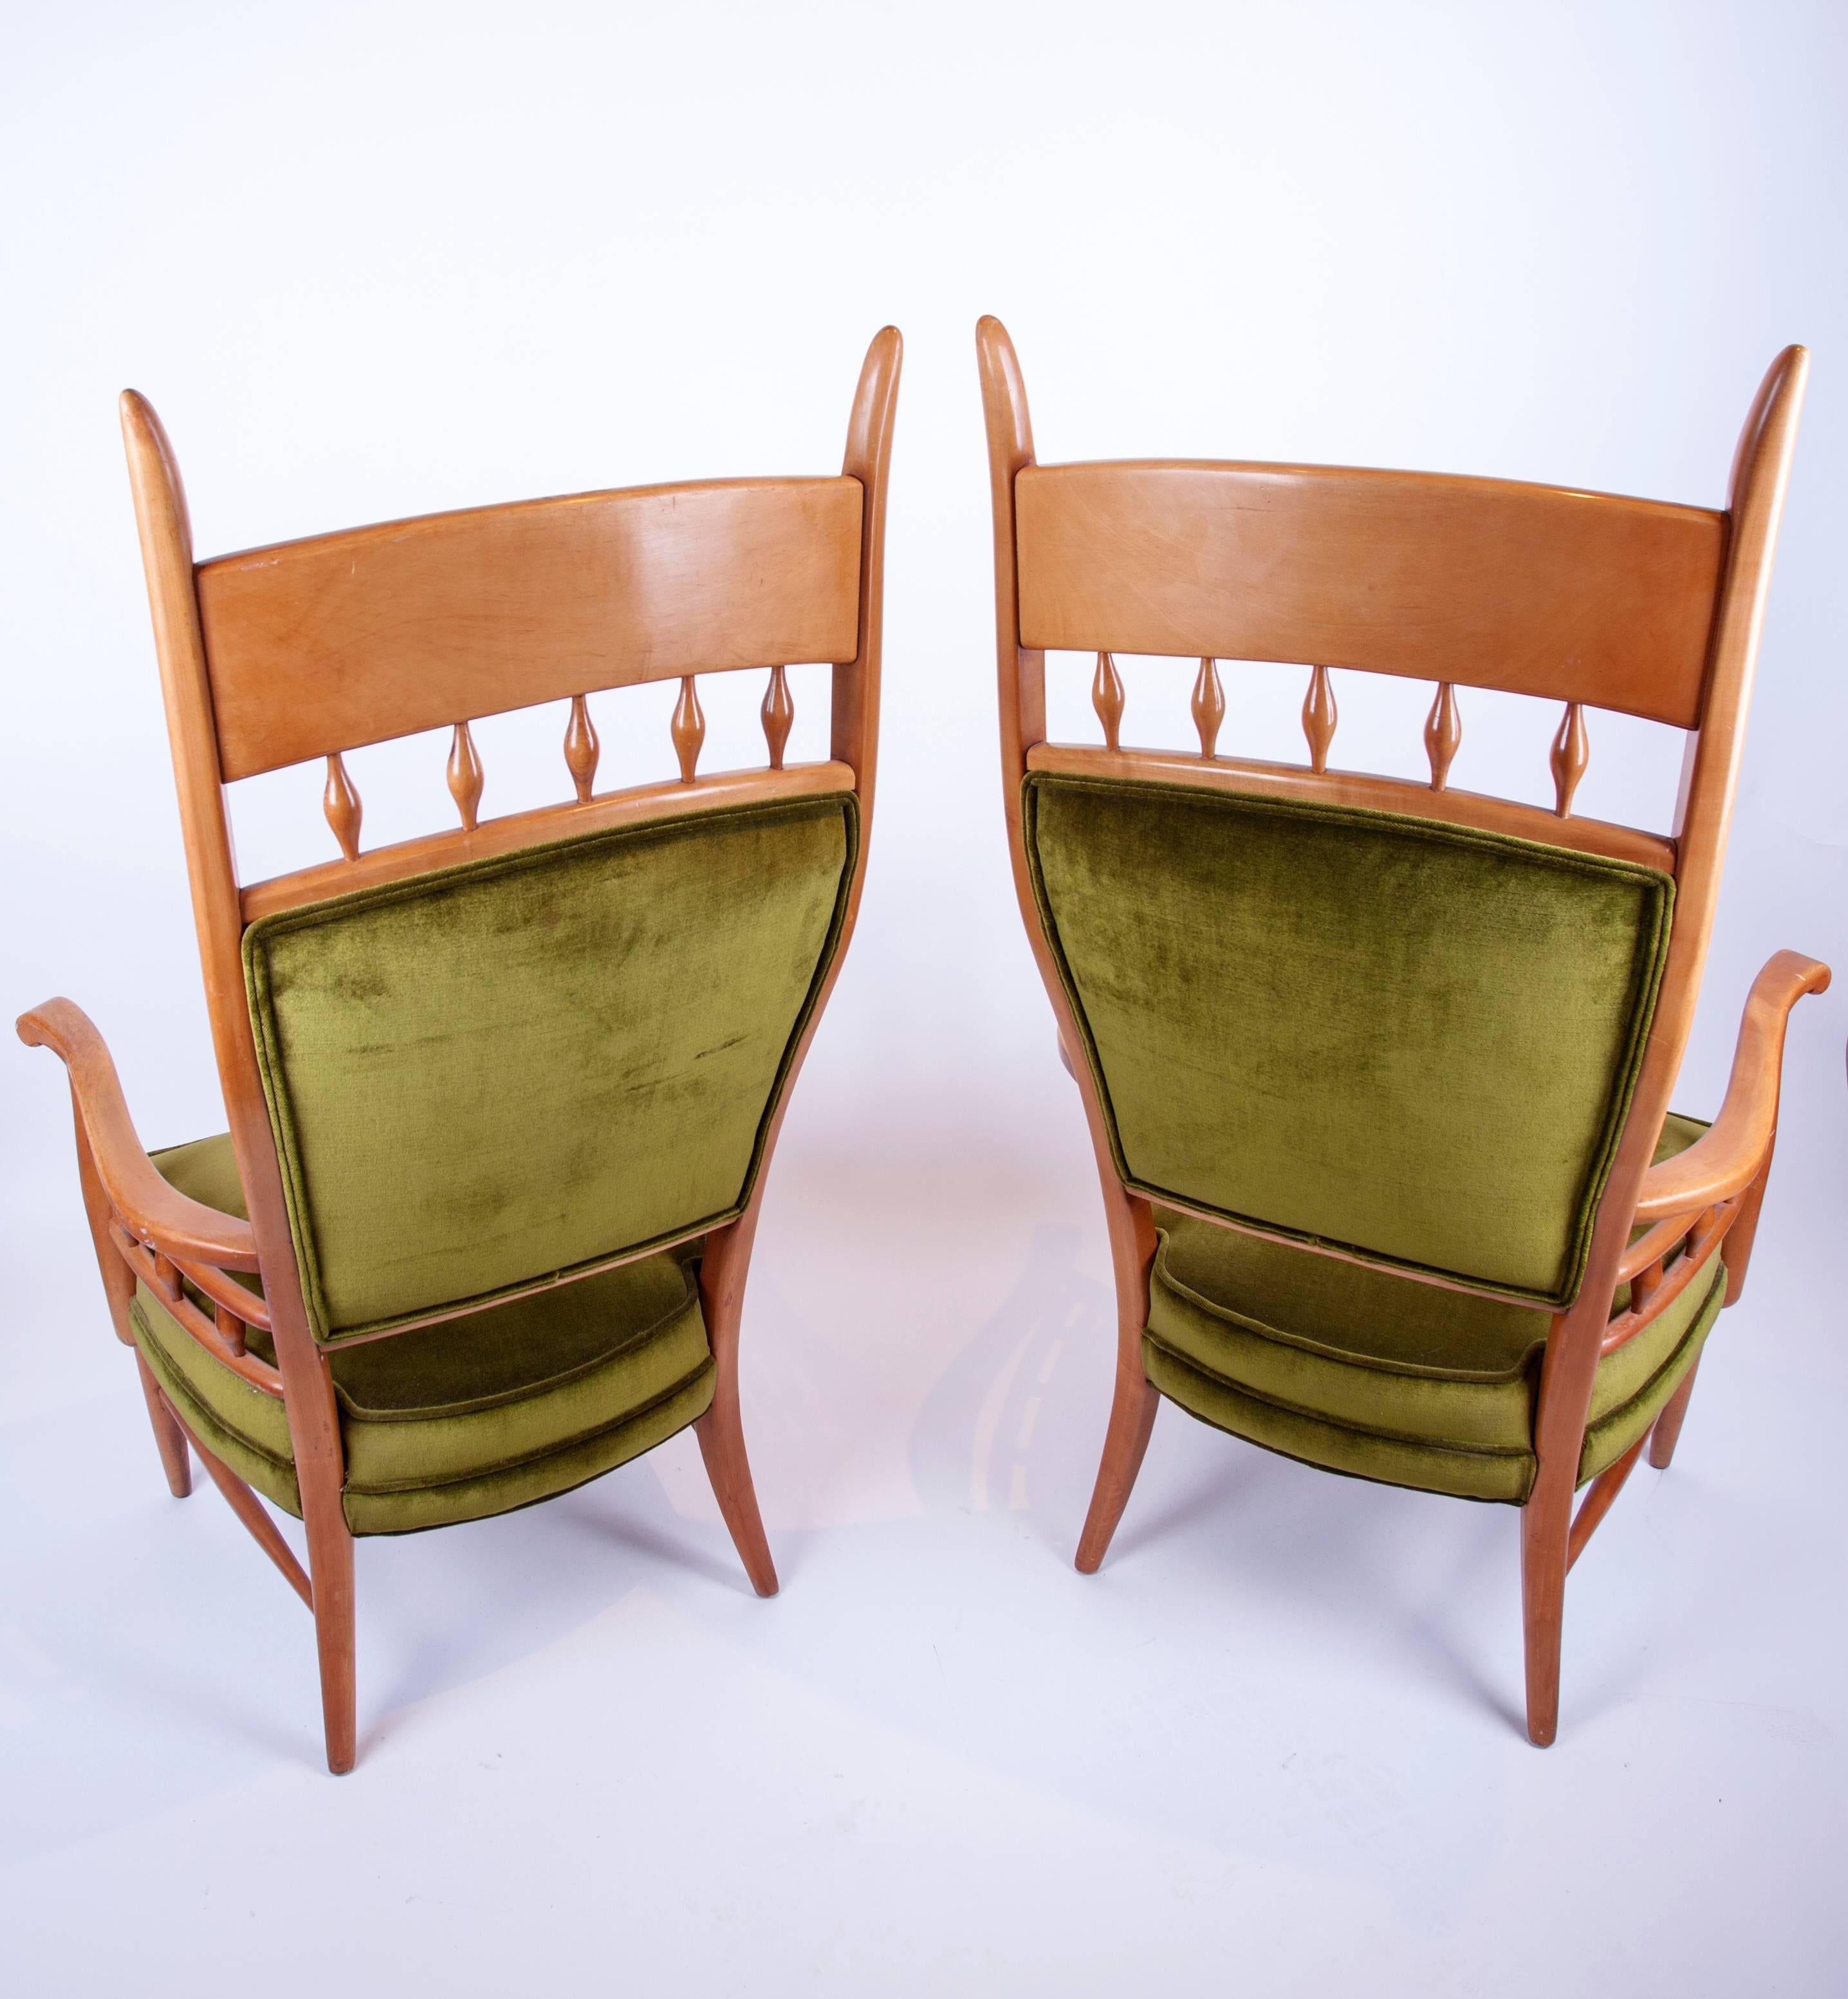 Mid-Century Modern Pair of Tall Fruitwood Framed Armchairs by Maxwell Royal. C. 1950's. For Sale